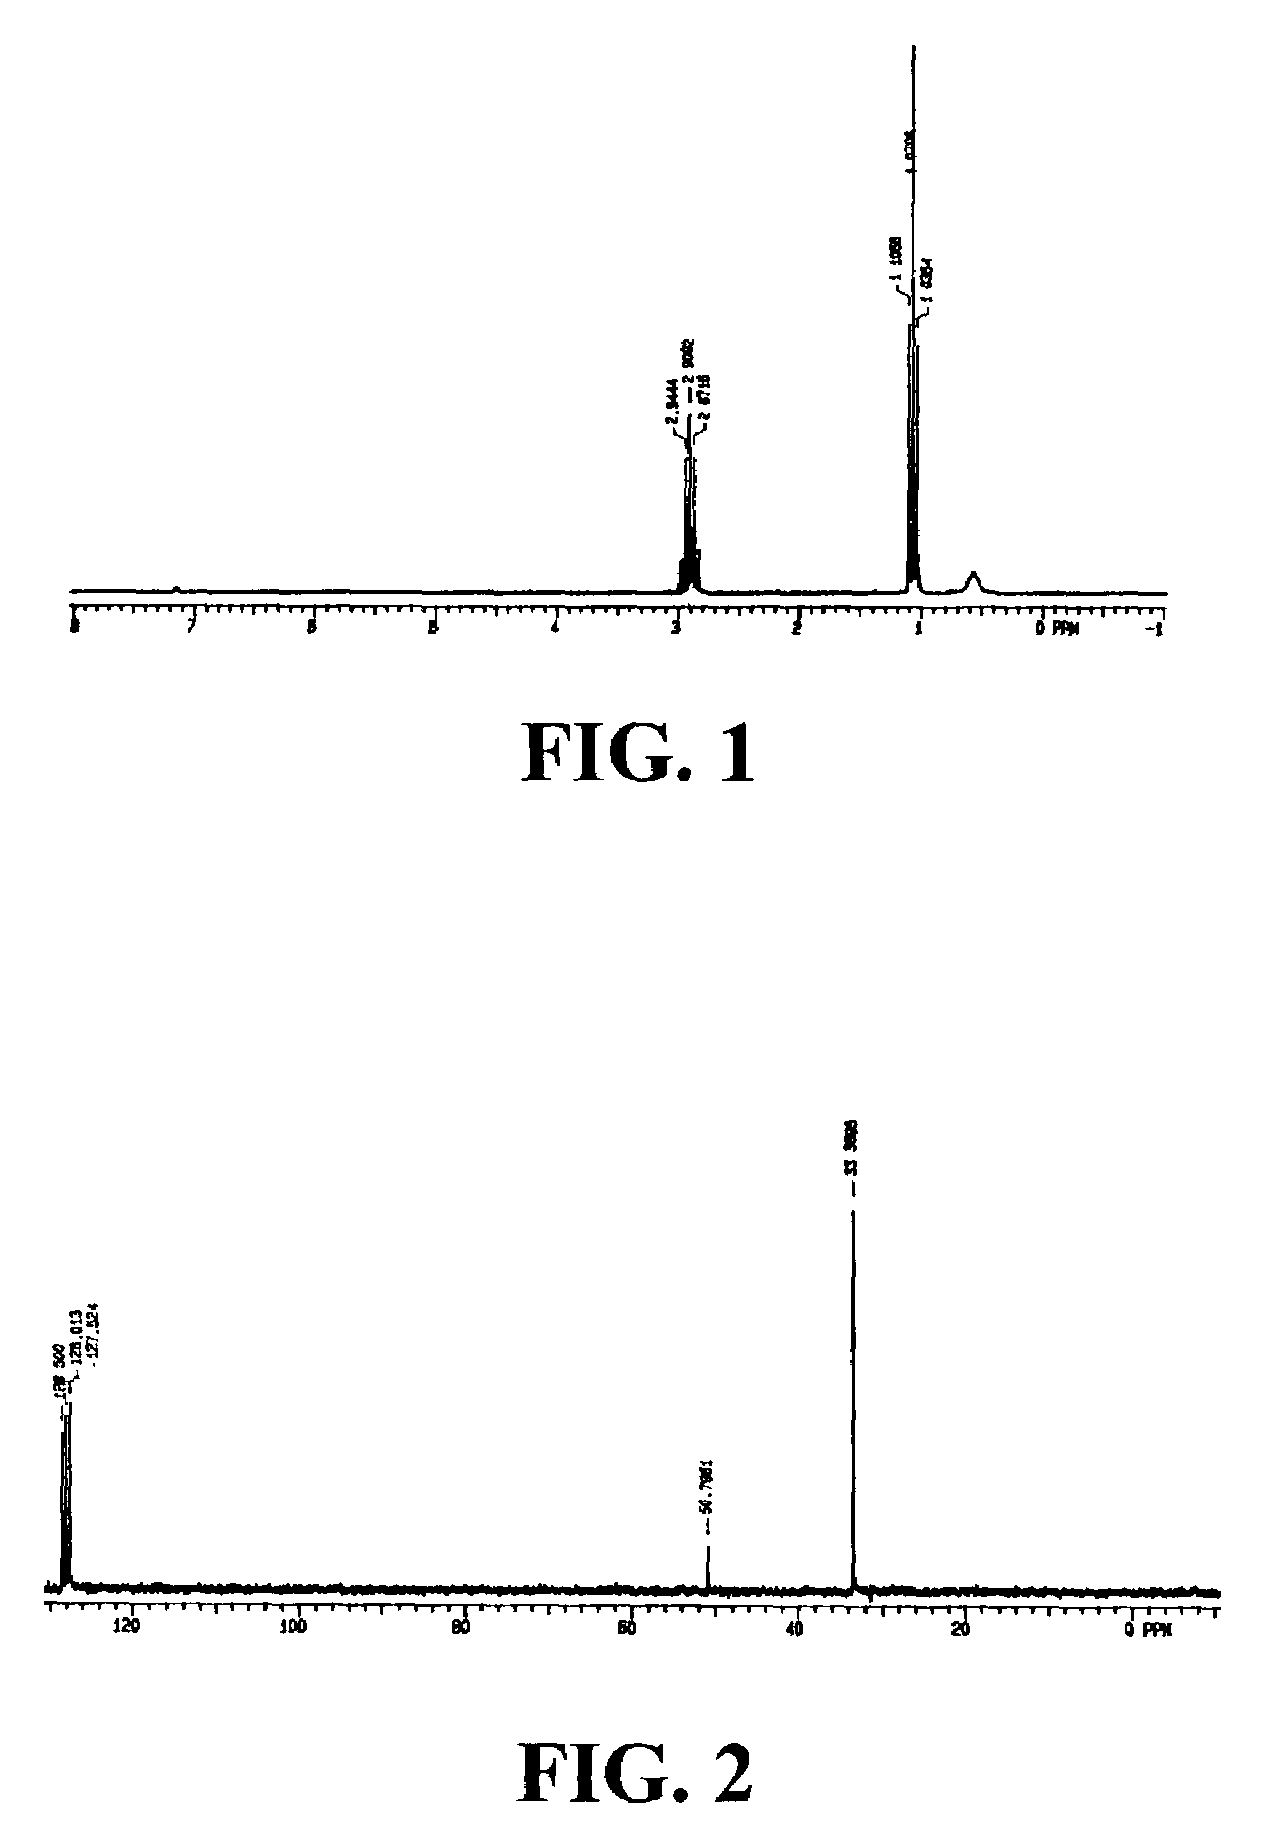 Composition and method for low temperature deposition of silicon-containing films such as films including silicon nitride, silicon dioxide and/or silicon-oxynitride